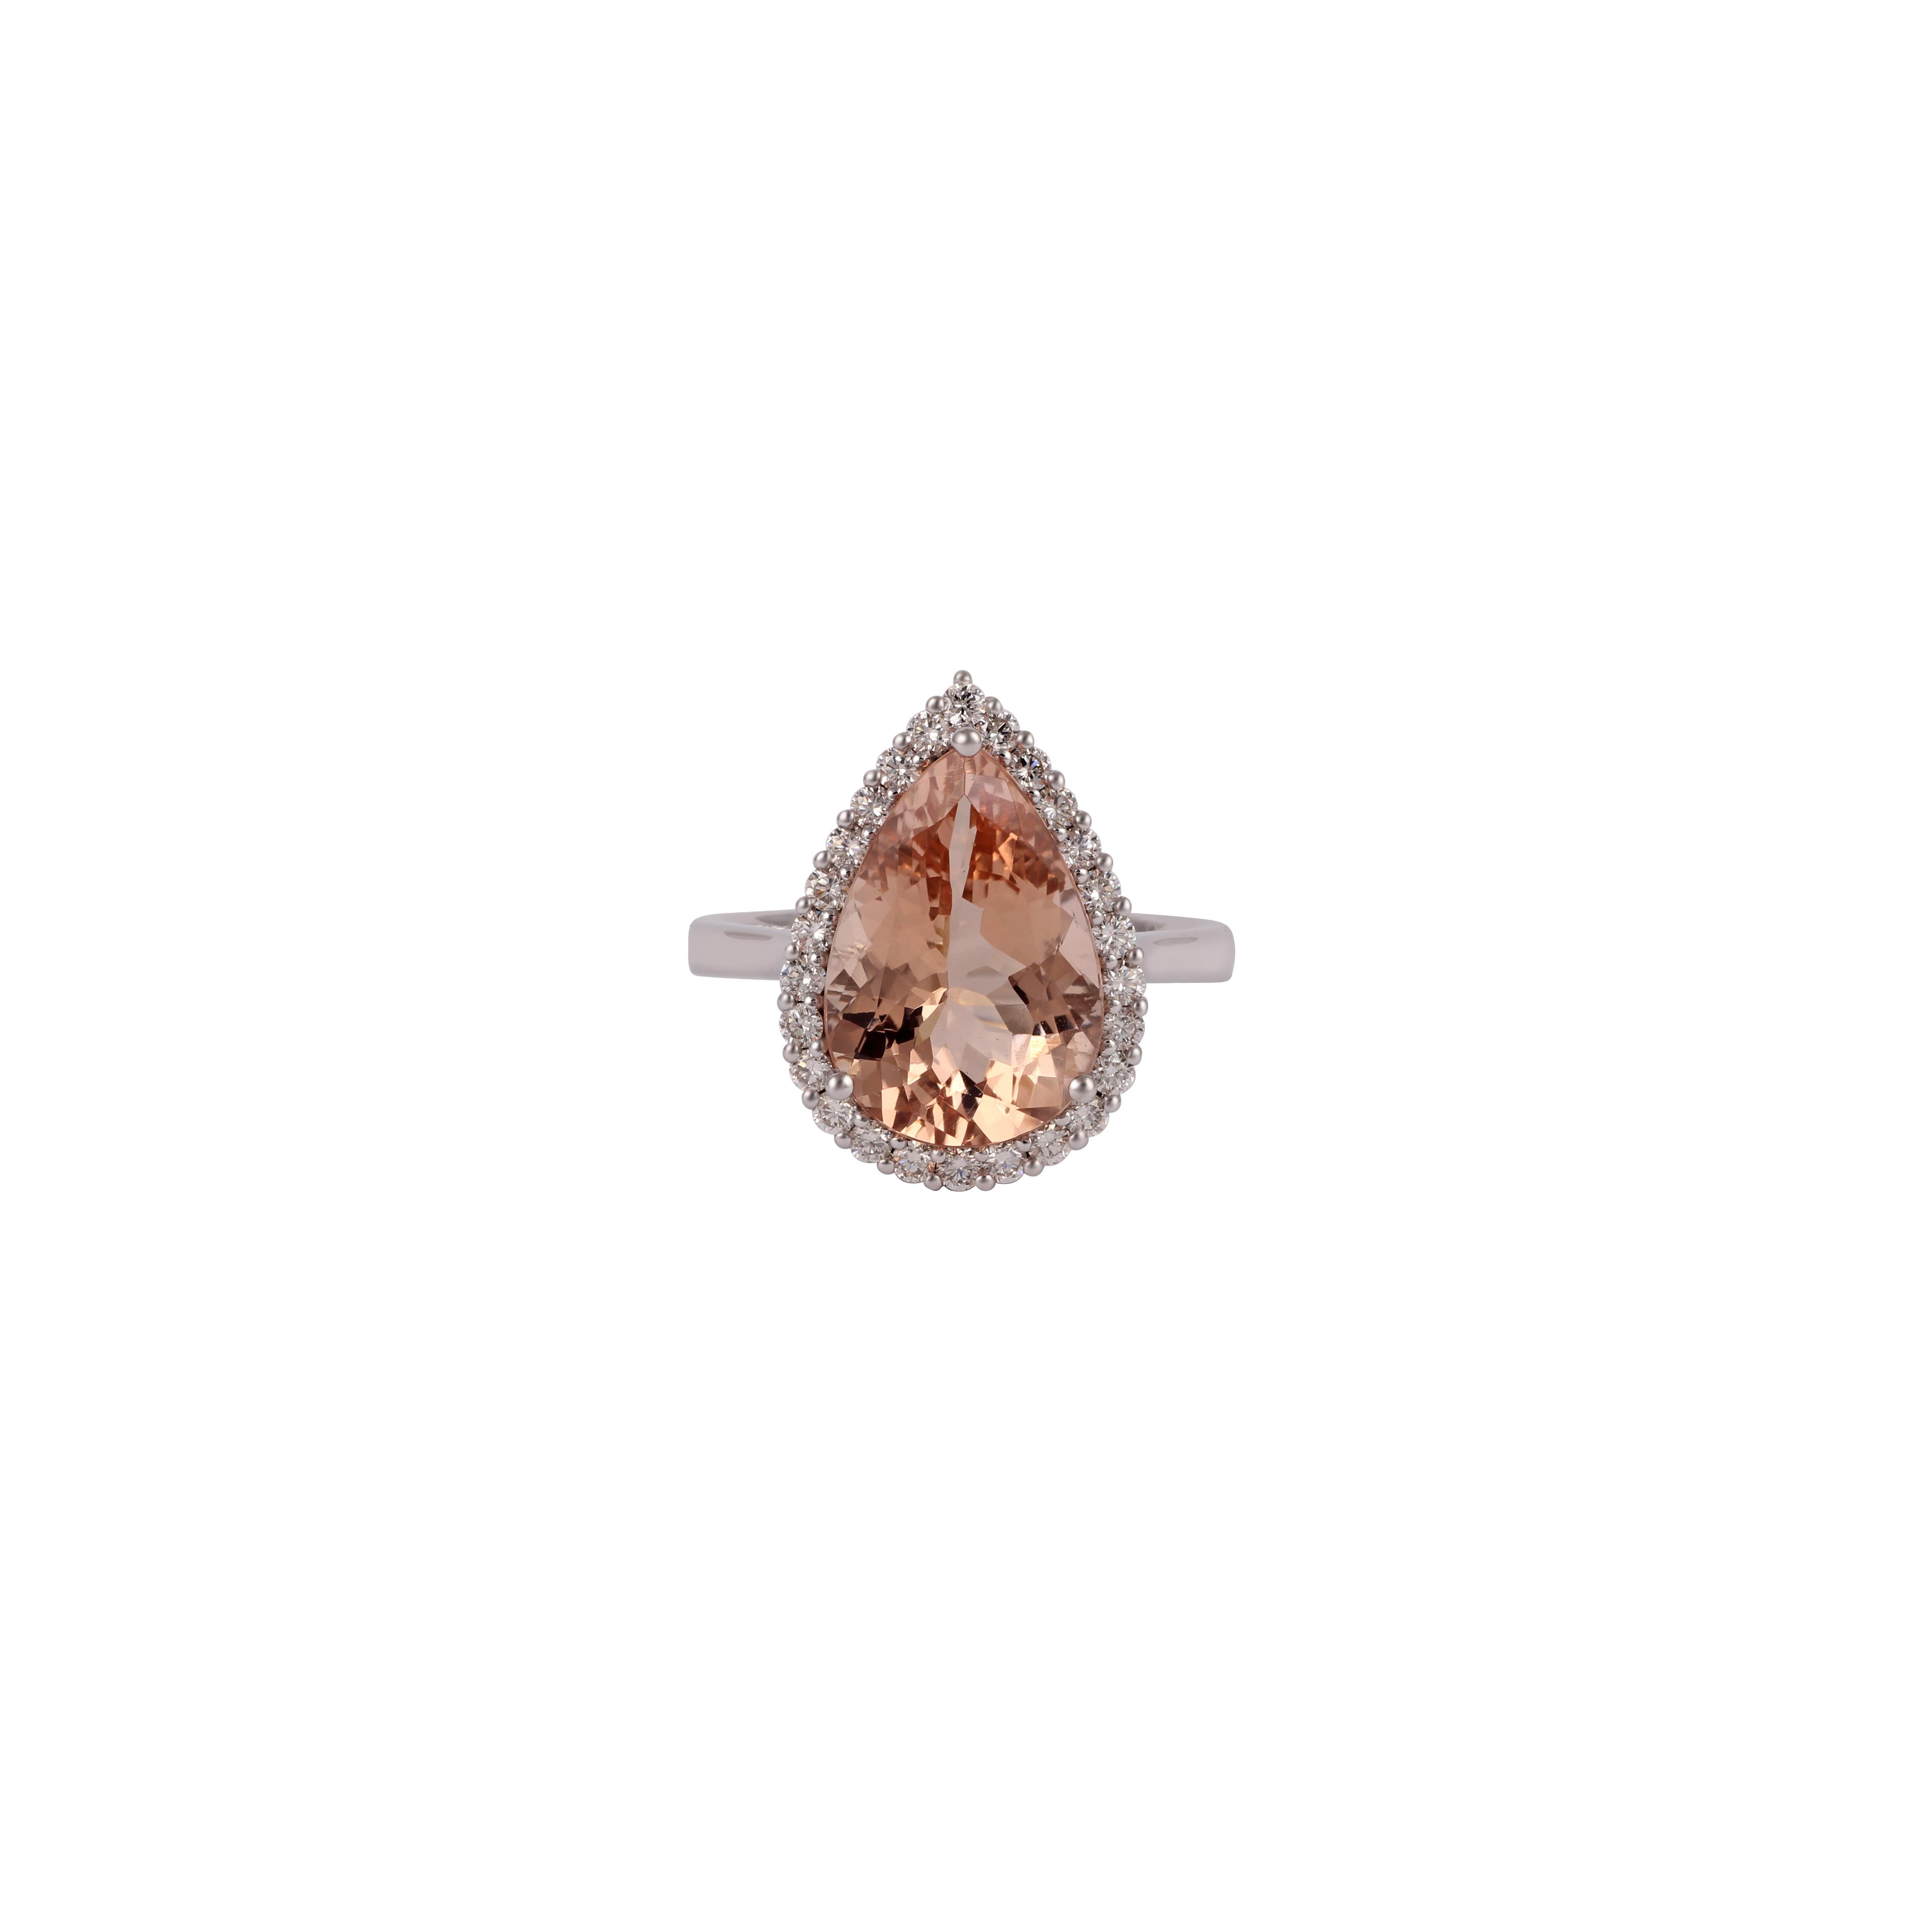 Its an elegant morganite - diamond ring studded in 18k white gold with 1 piece of pear shaped morganite weight 4.33 carat with 35 pieces of round shaped brilliant cut diamonds weight 0.68 carat this entire ring studded in 18k white gold weight 3.51